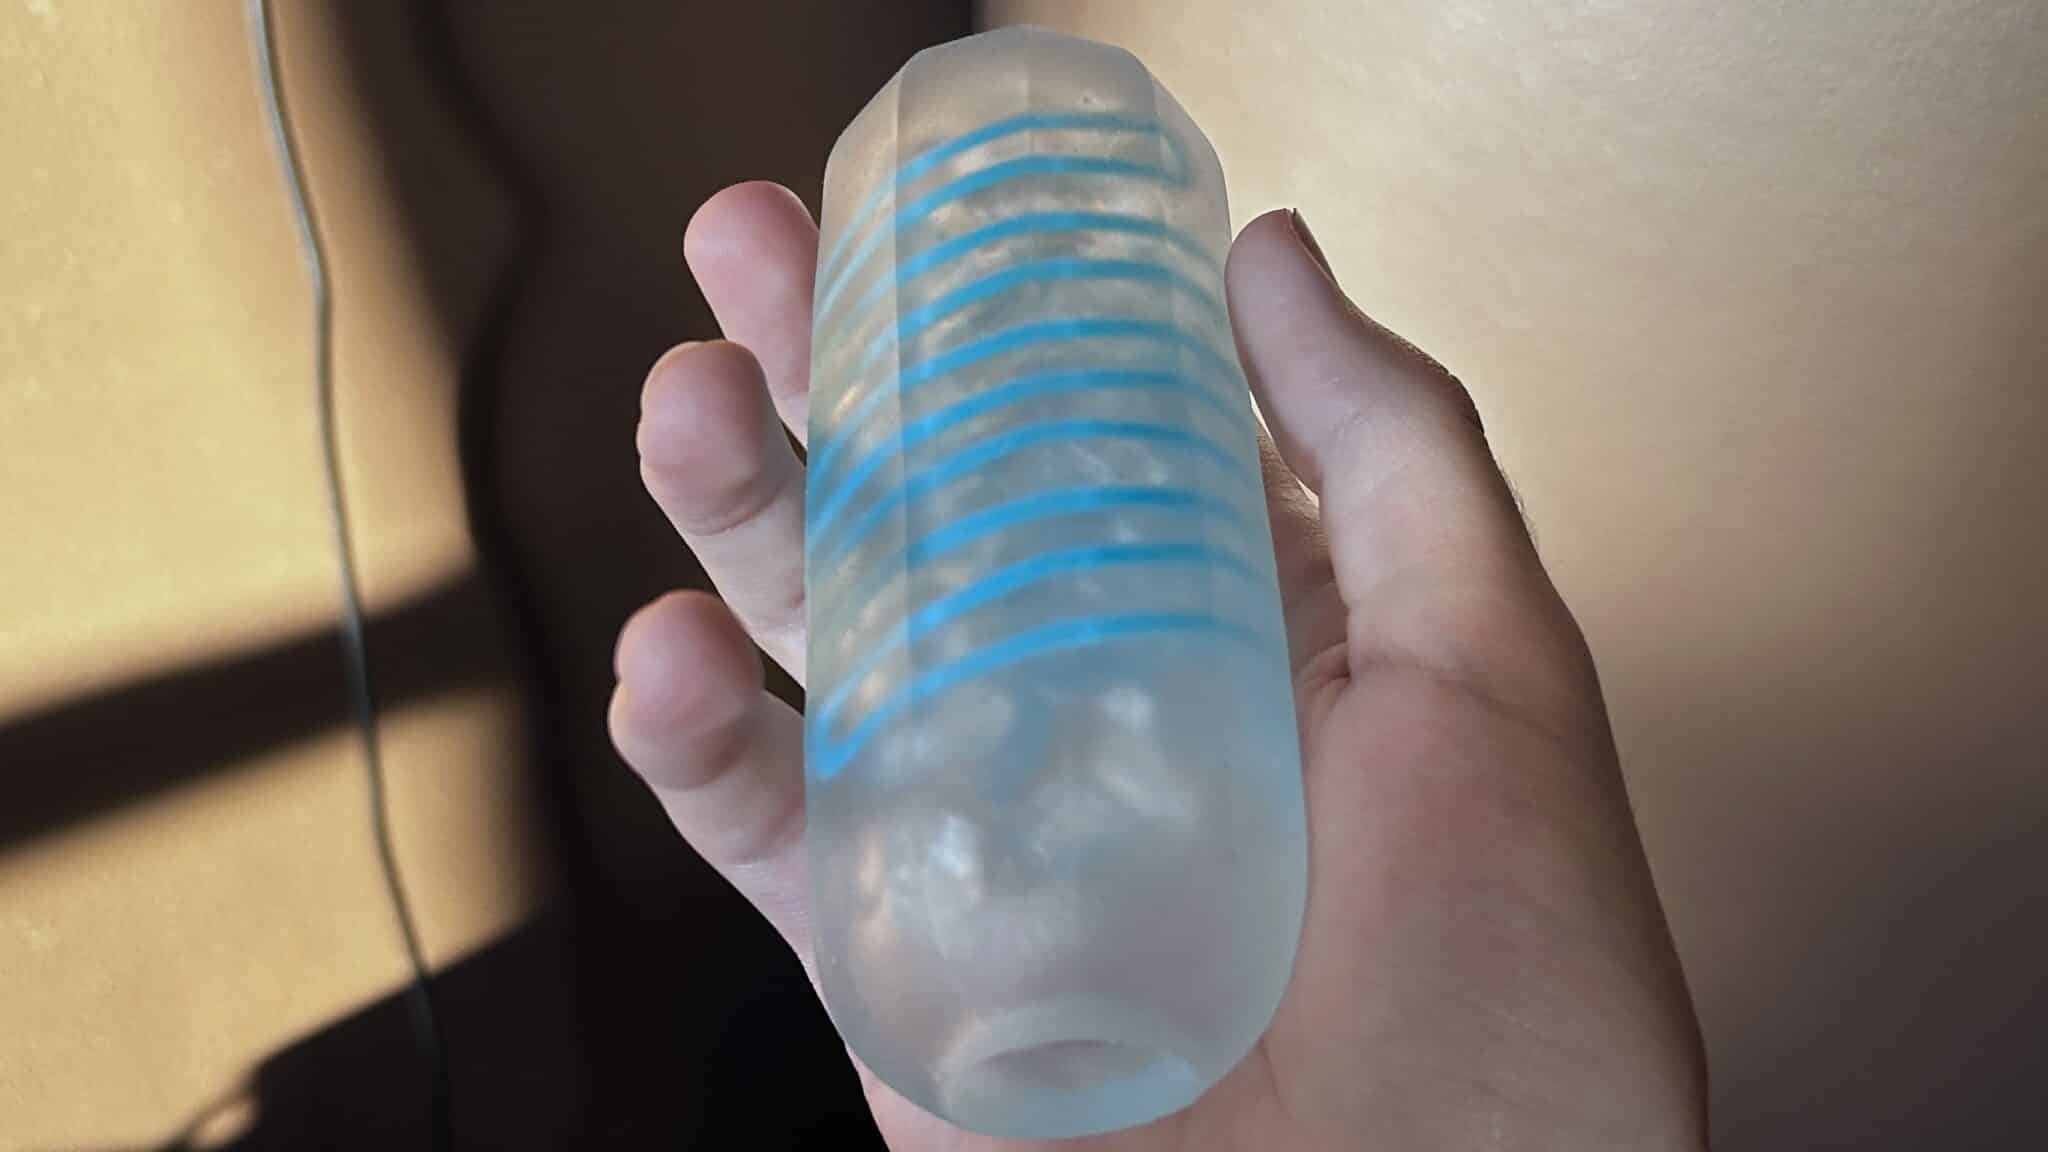 Tenga Spinner Tetra How I think it performed